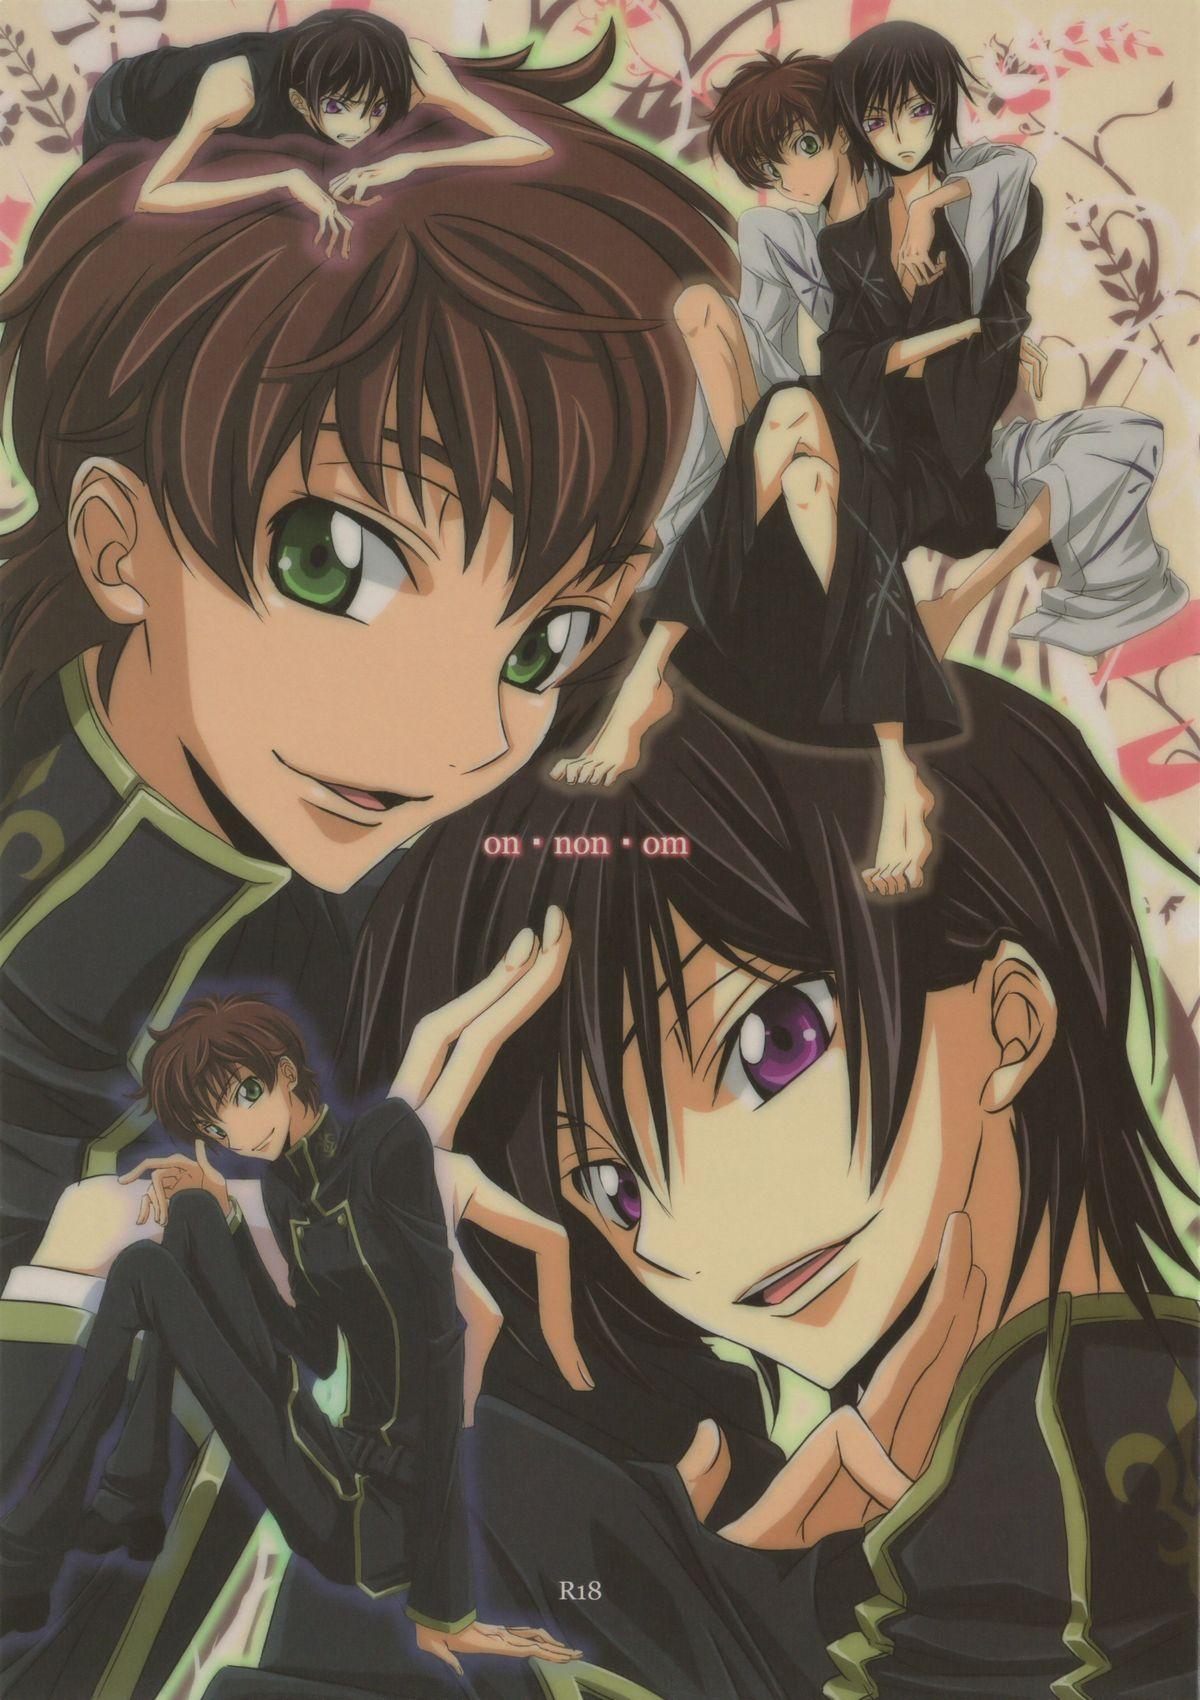 Stripping on・non・om - Code geass Casa - Page 1